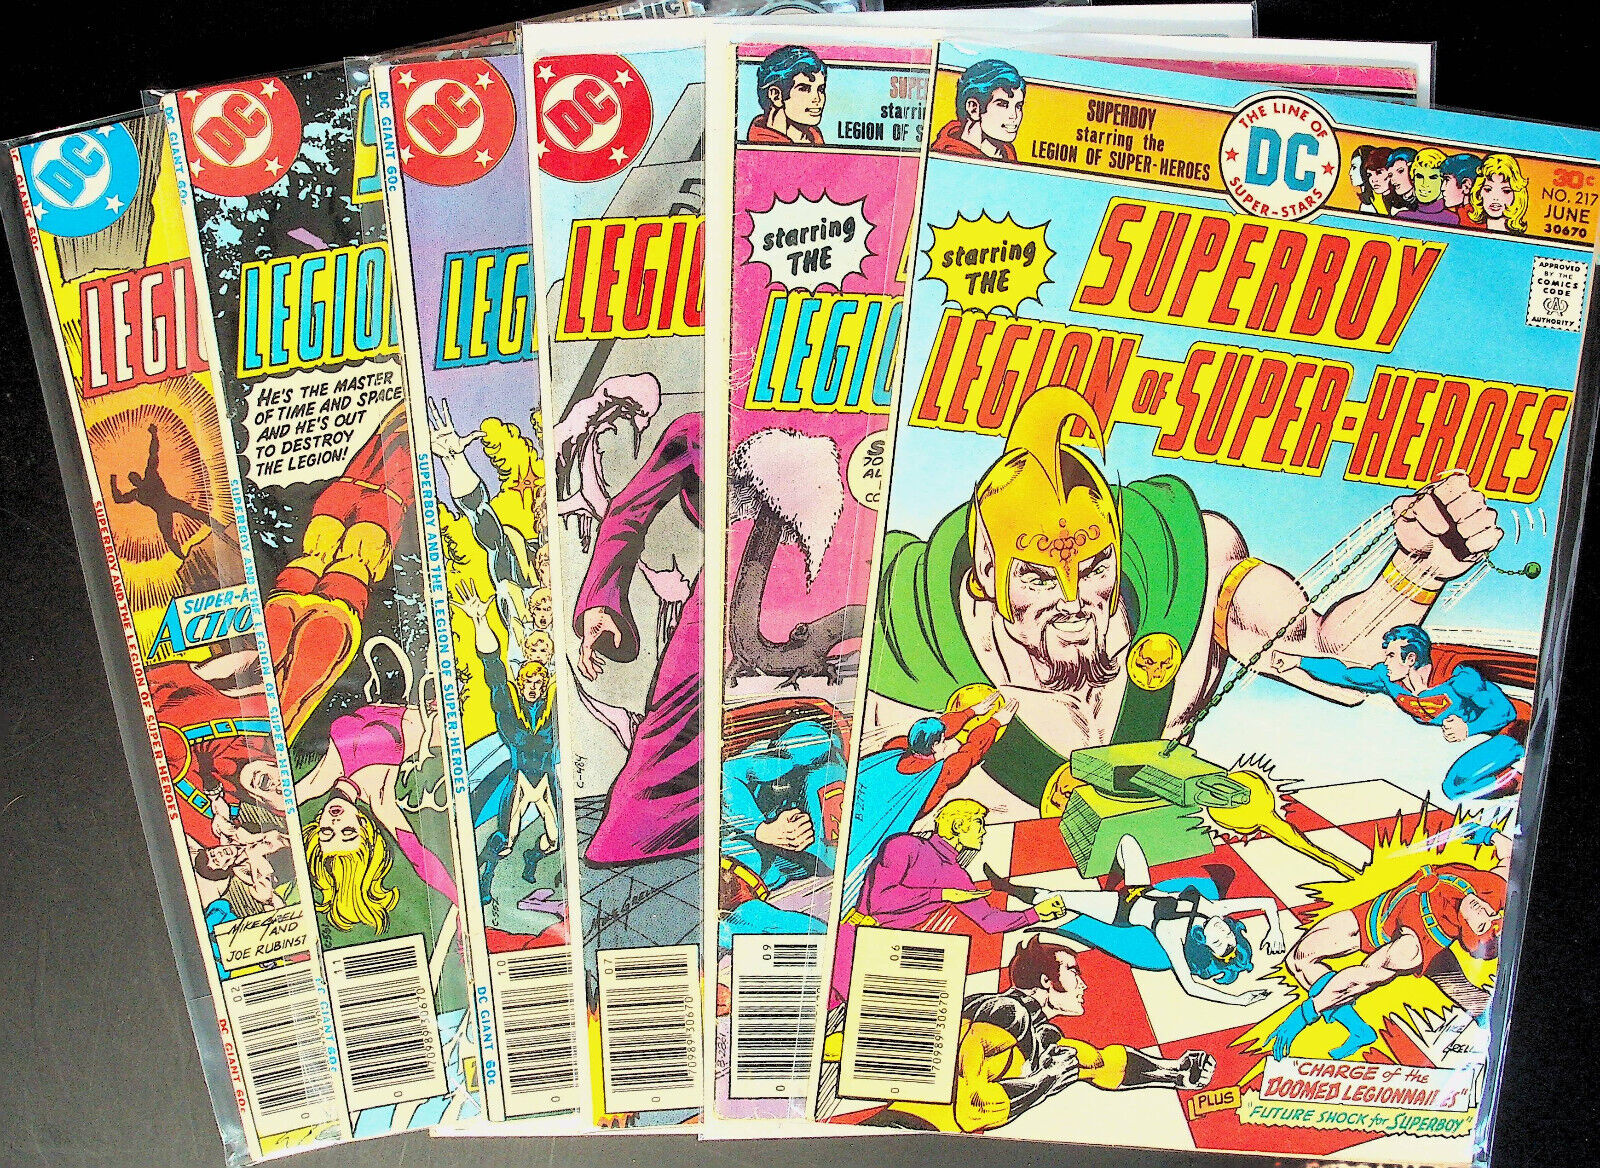 Superboy and the Legion of Super-Heroes 6-issue lot # 217,219,229,232,233,236